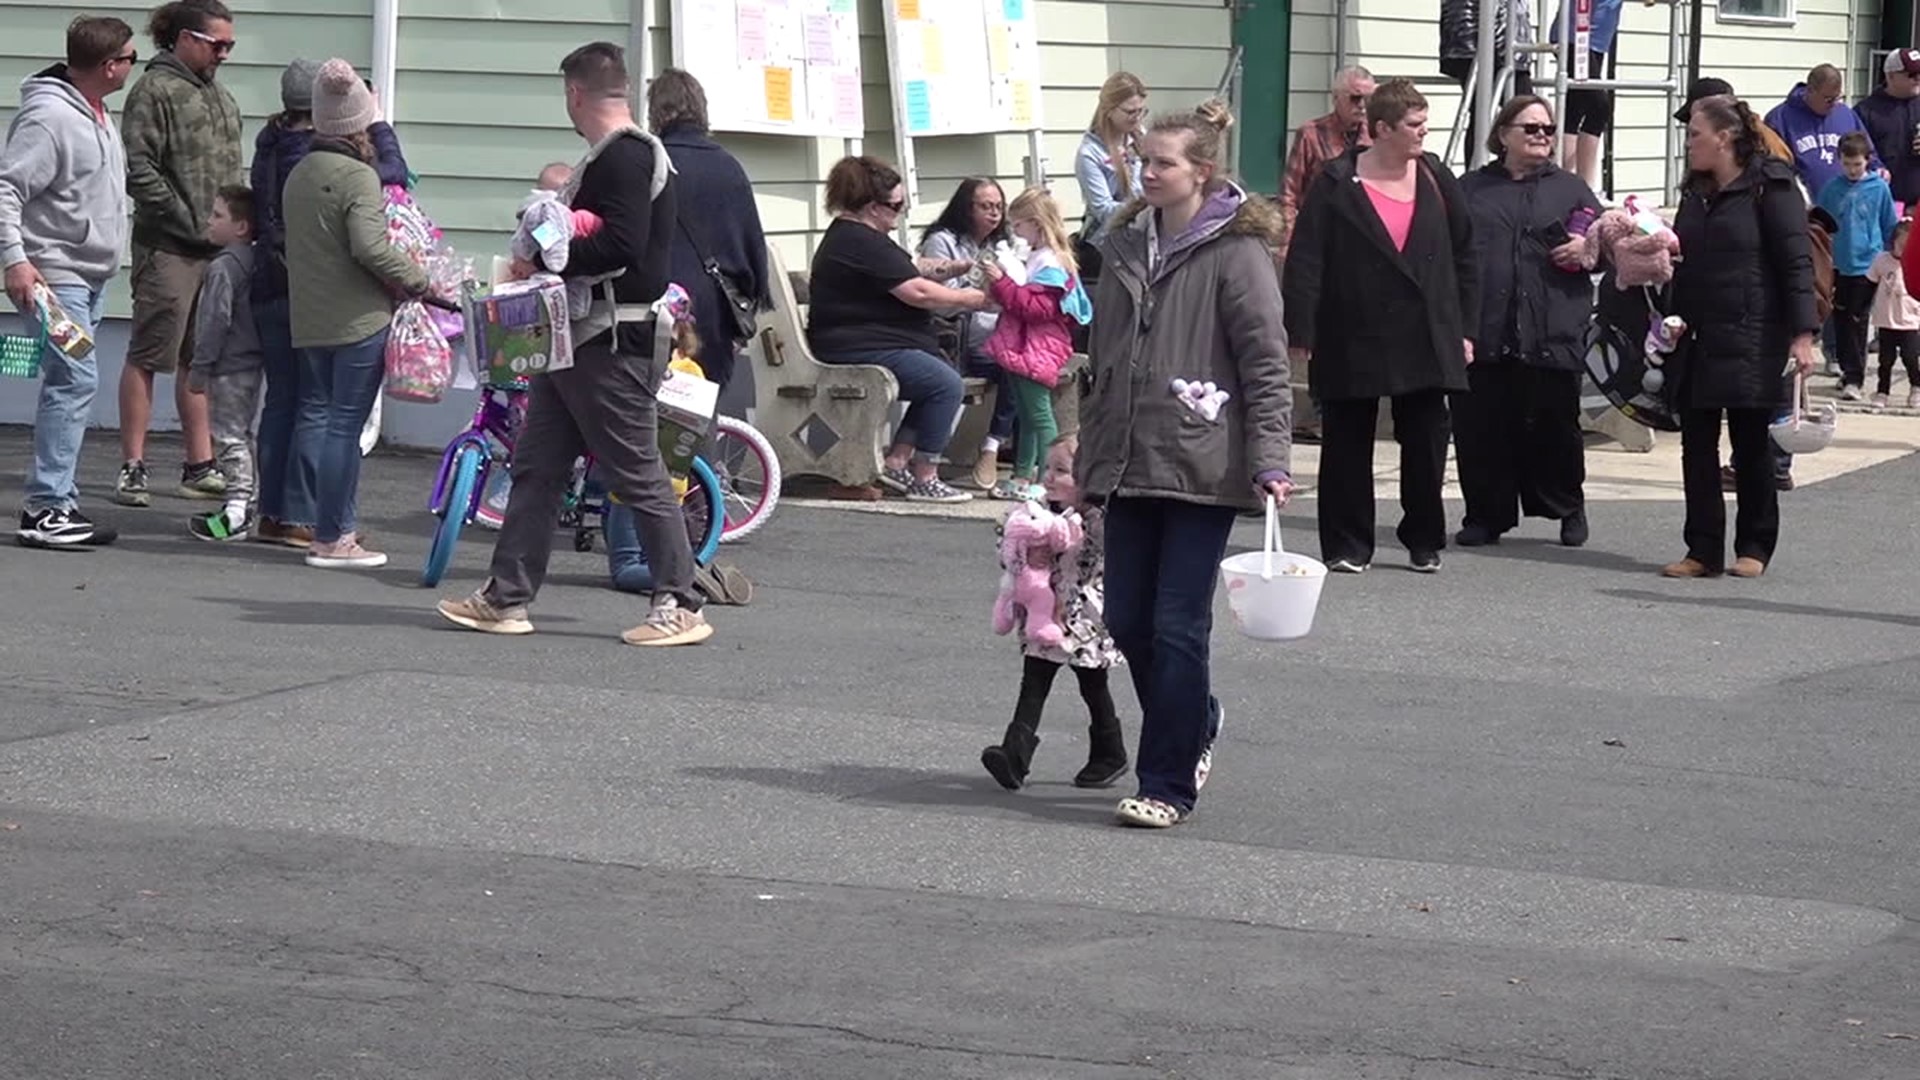 The egg hunt in St. Clair was as authentic as it gets with thousands of hard-boiled eggs dyed and hidden for kids to find.